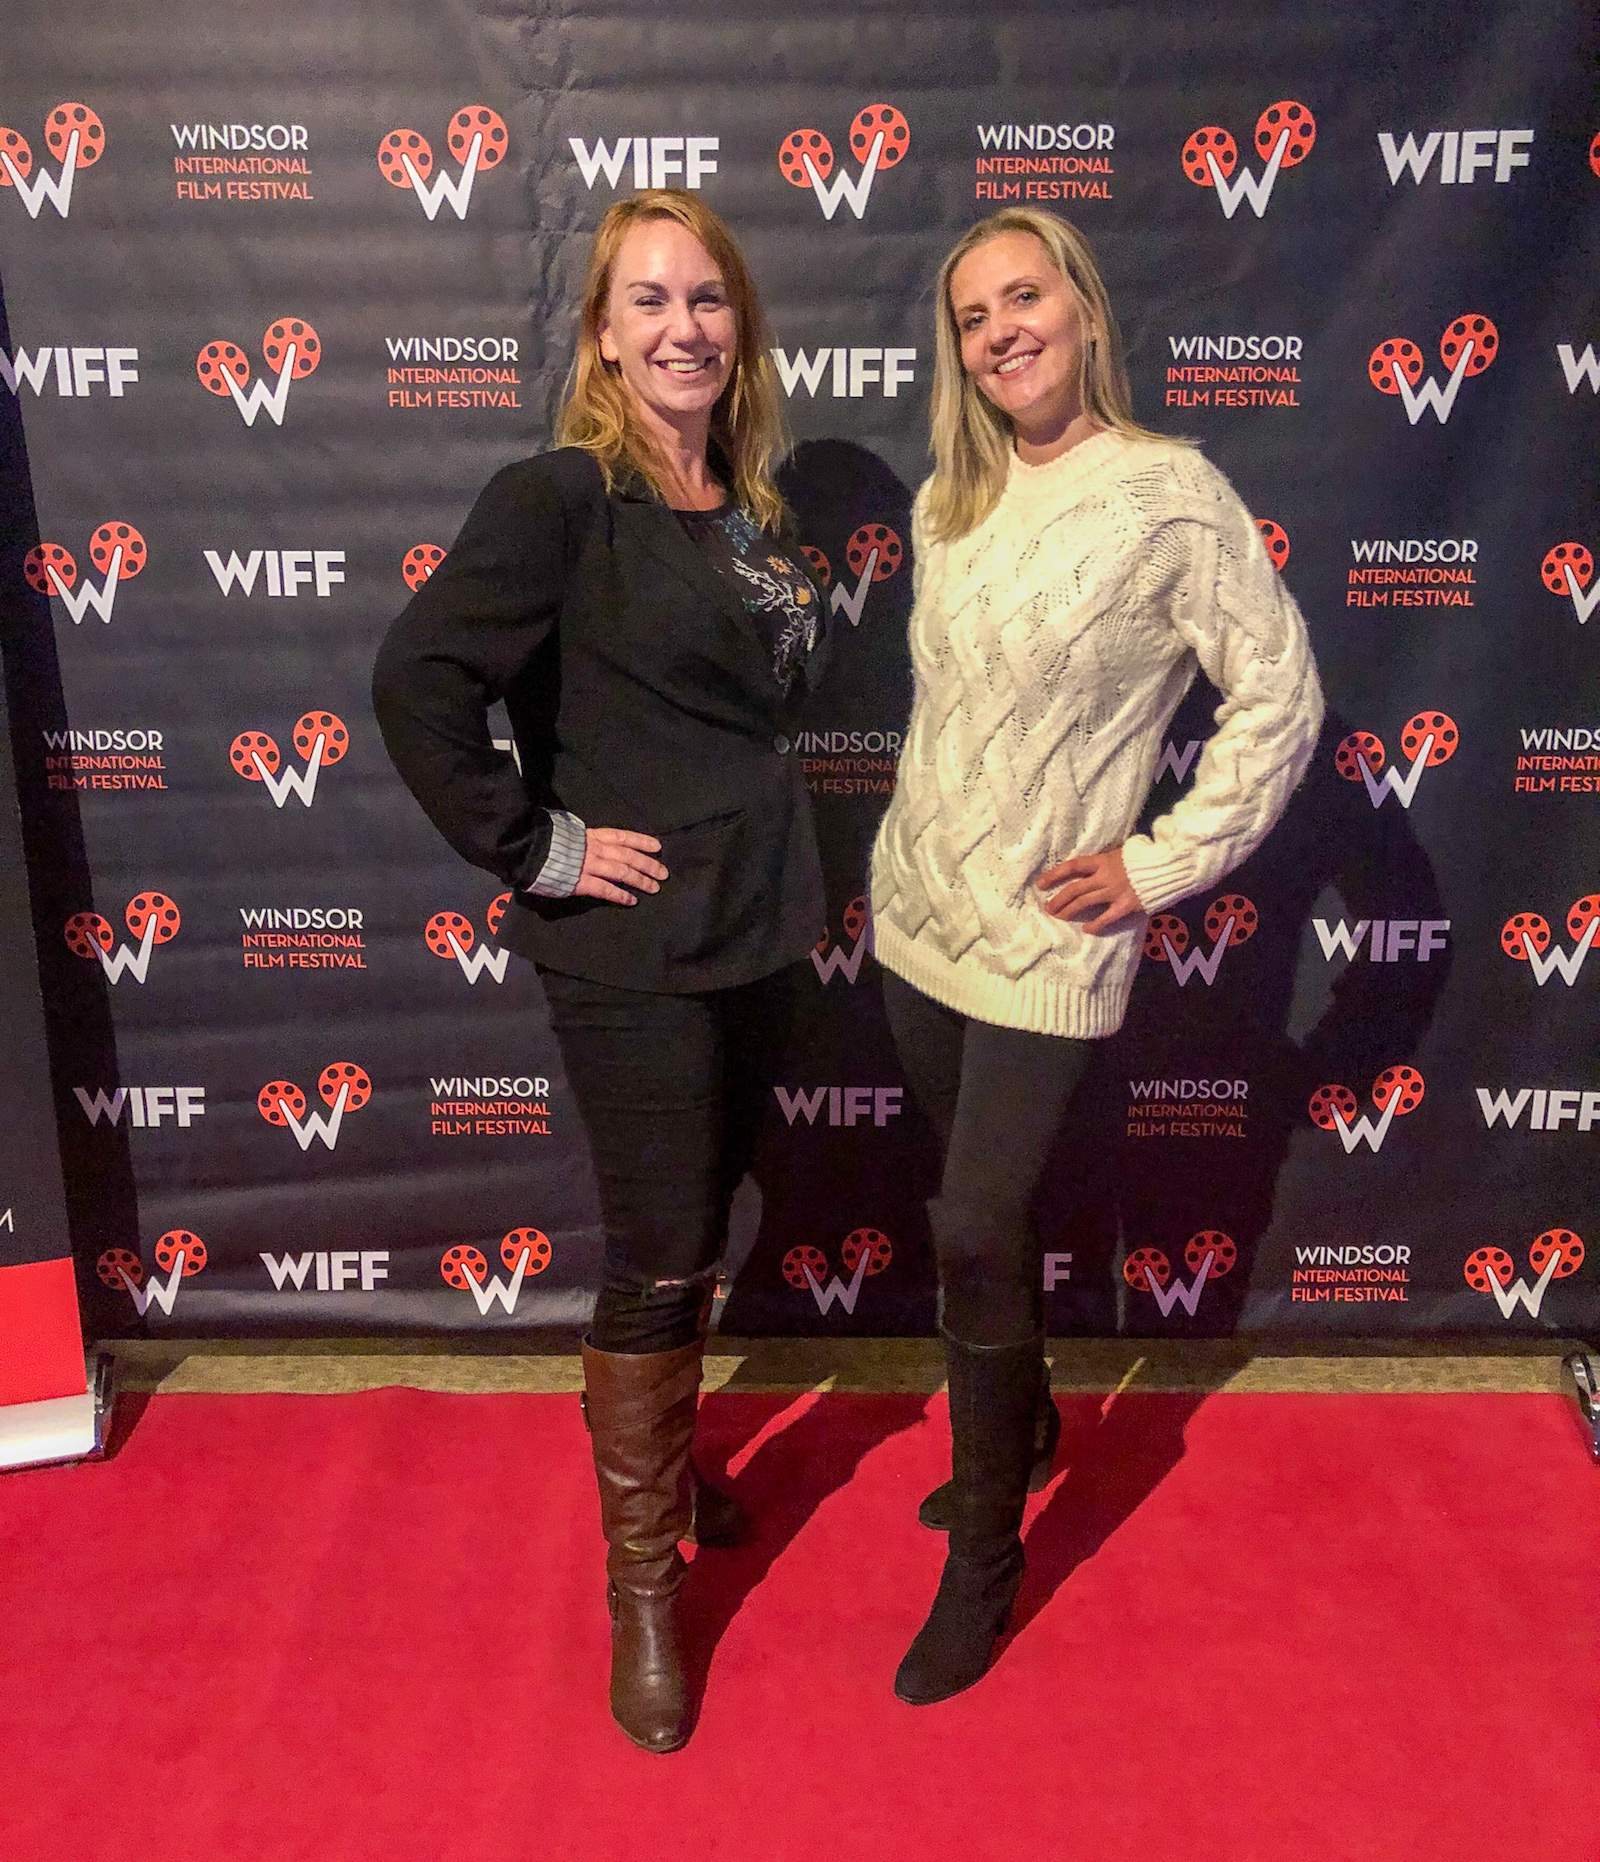 My friend Kasia Writes and I at the opening party of the Windsor Film Festival in Windsor, Ontario On November 1, 2019